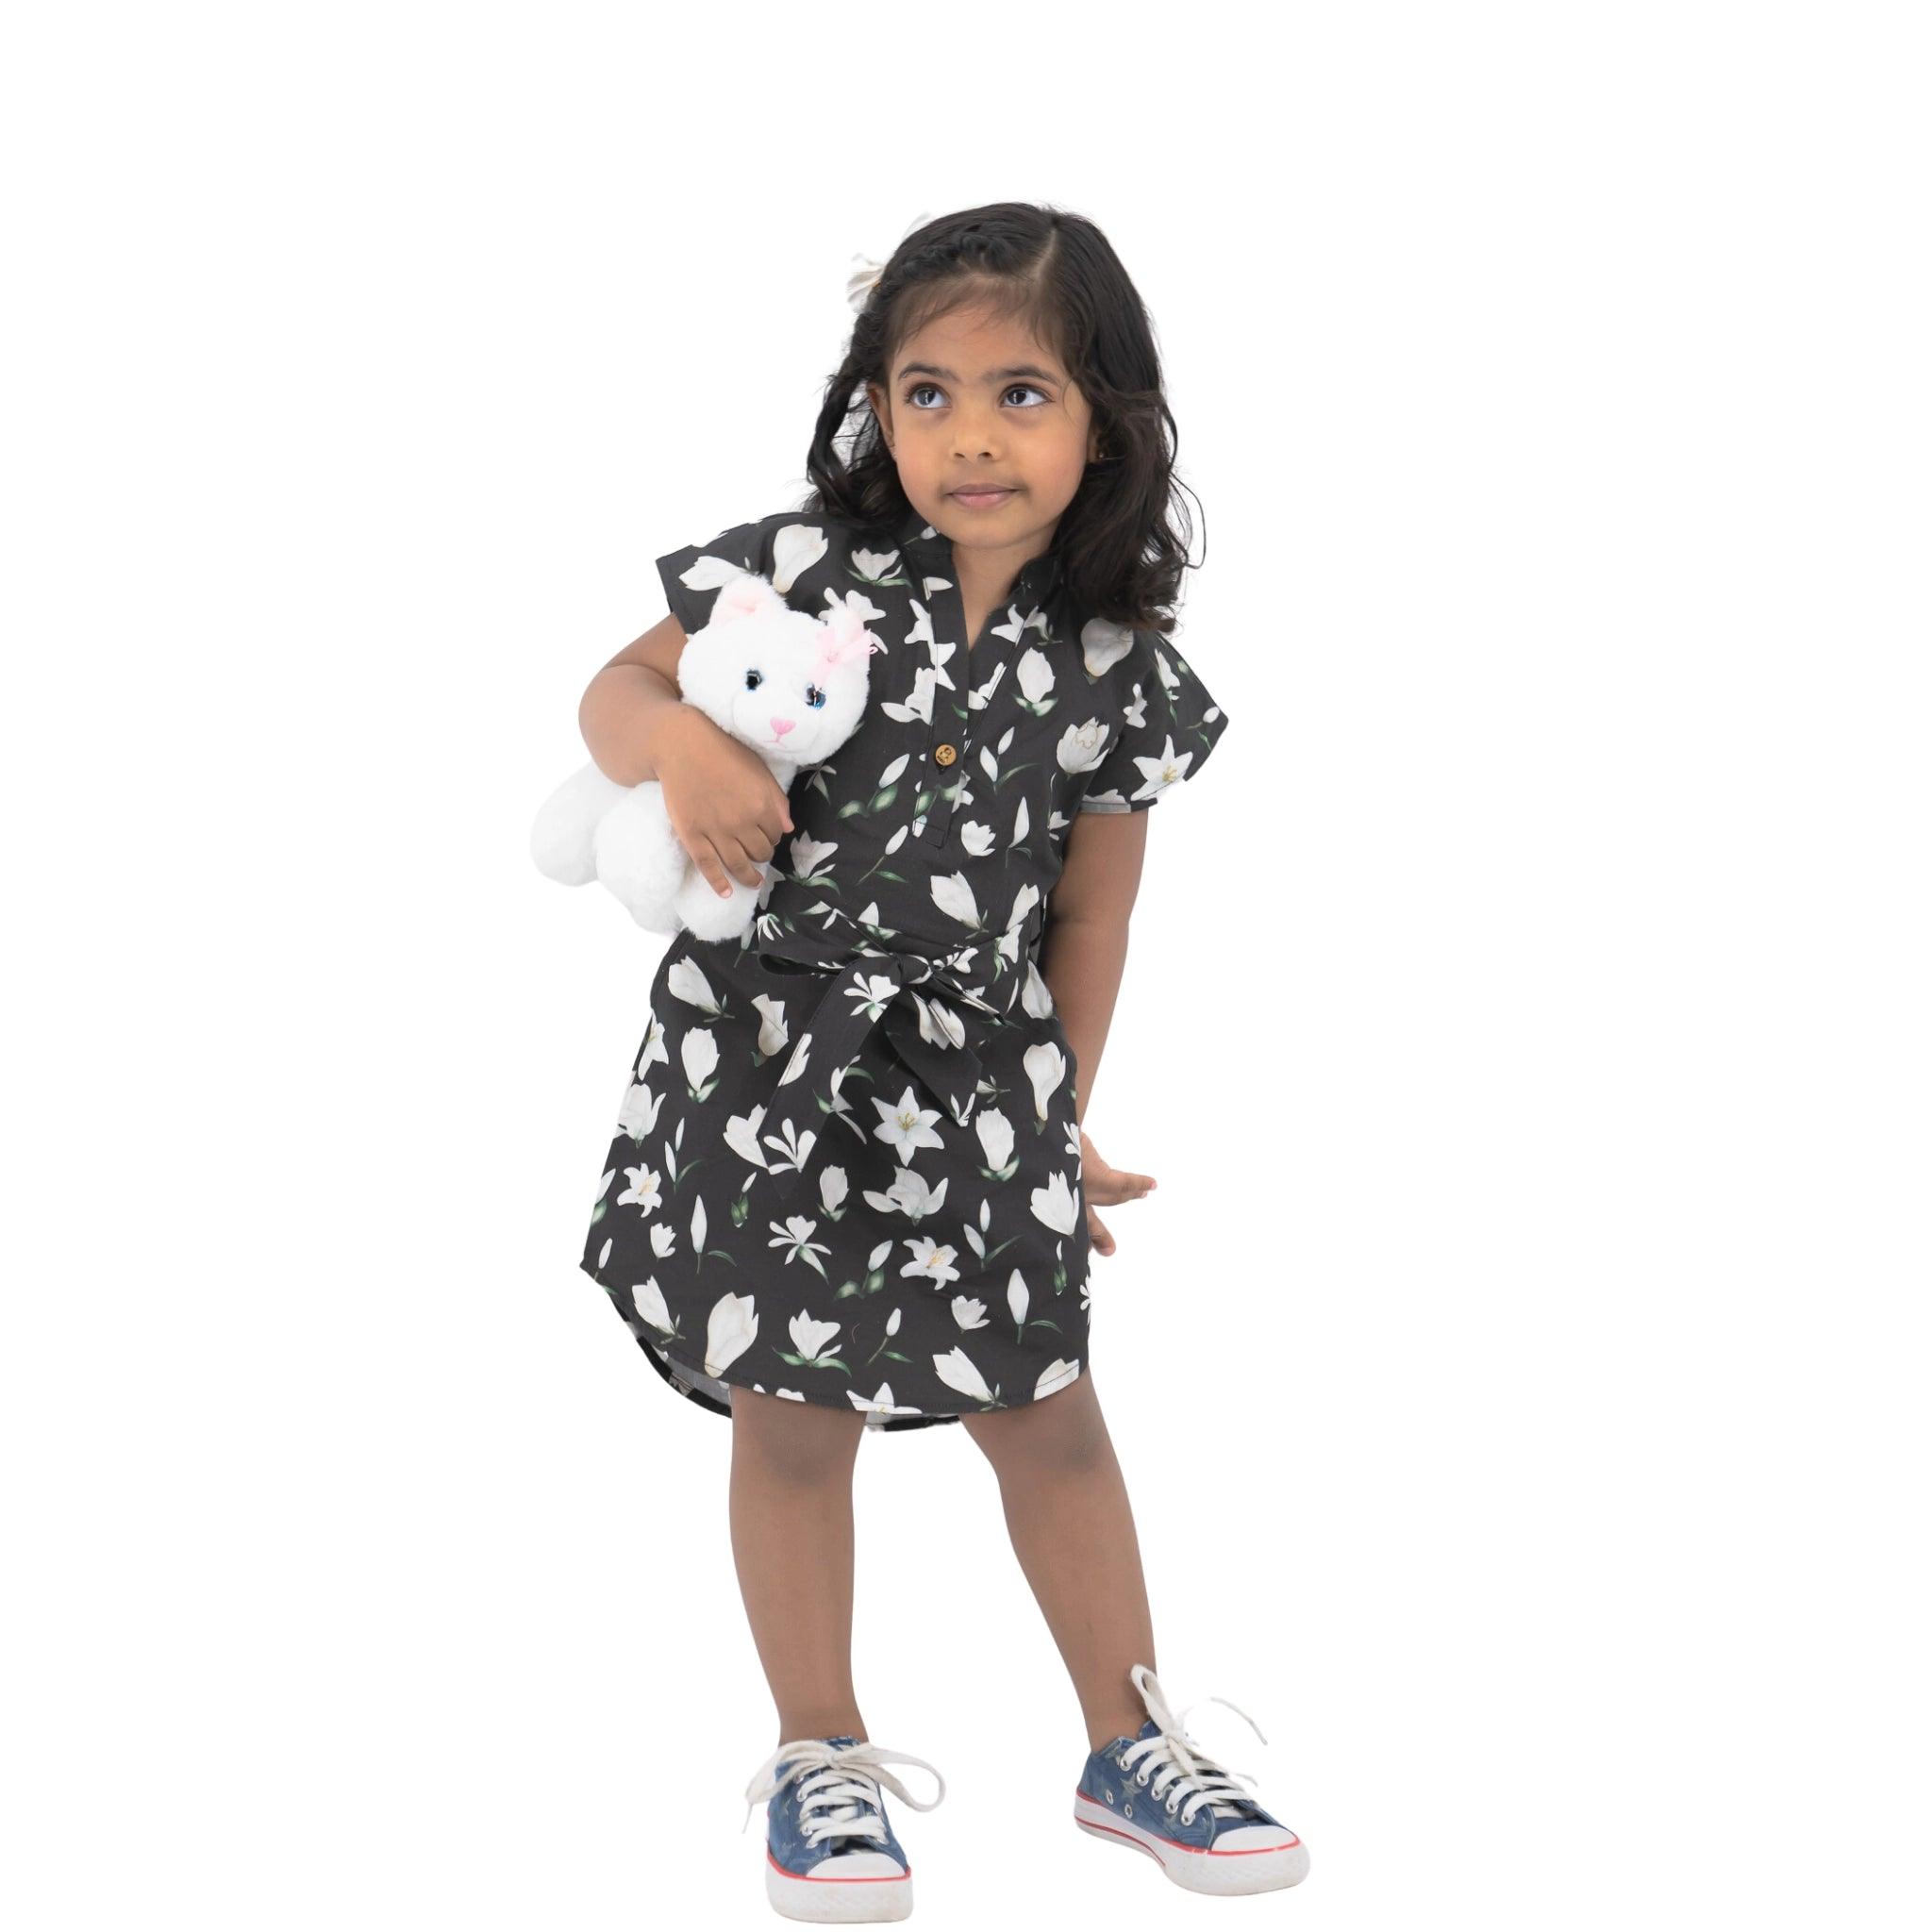 Young girl wearing a Karee Black Lilly Blossom Cotton Shirt Dress and sneakers, holding a white stuffed toy, standing against a white background.